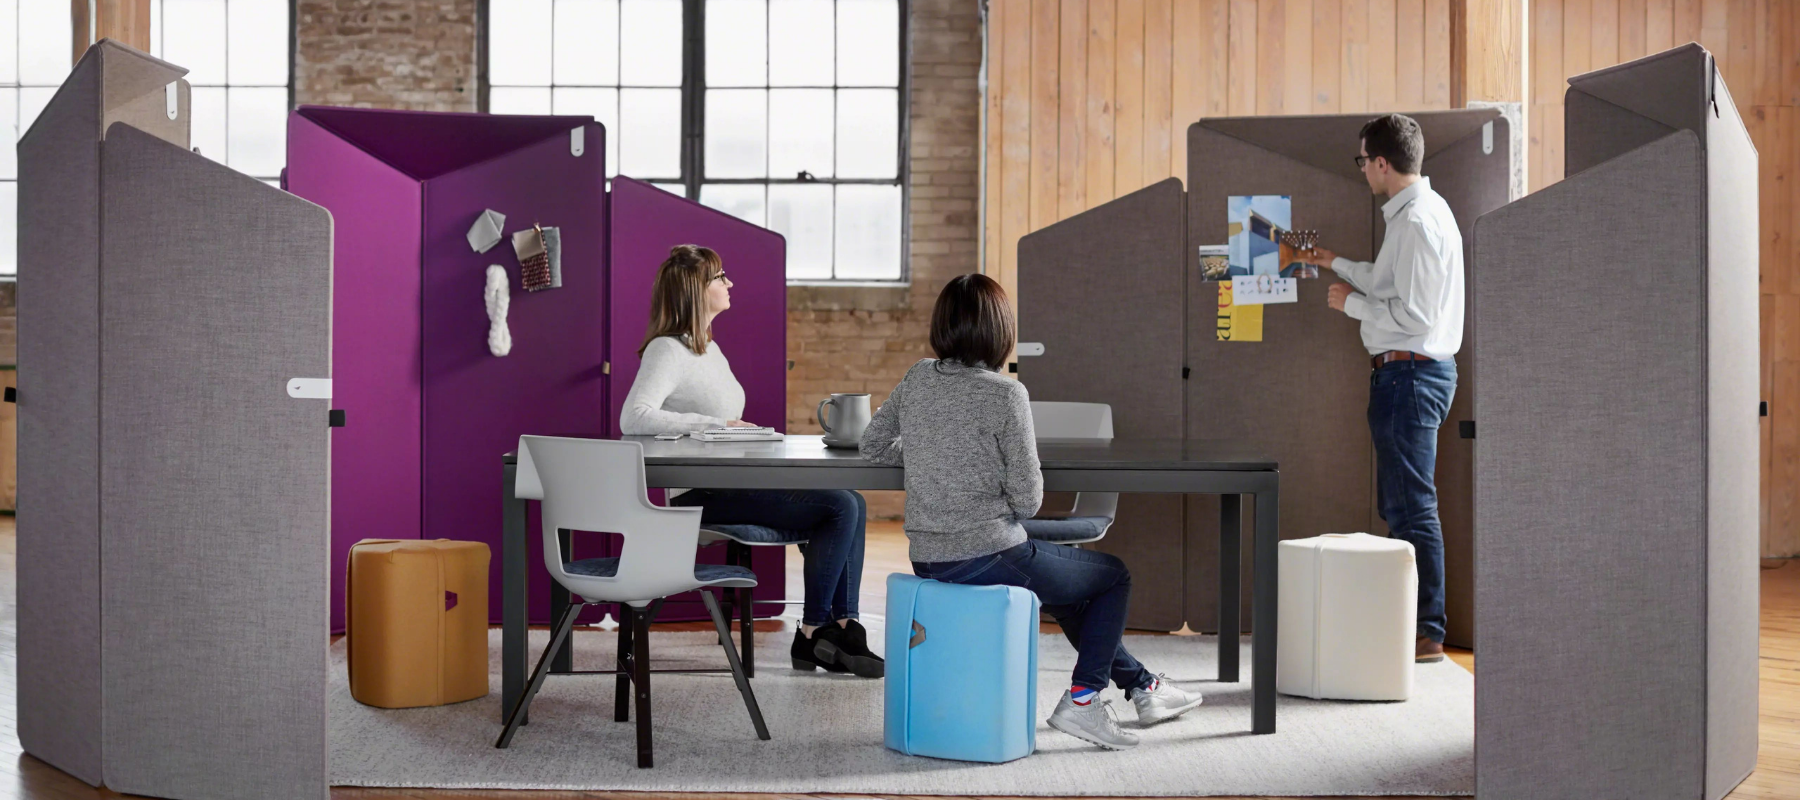 freestanding space division products create an impromtu team meeting space